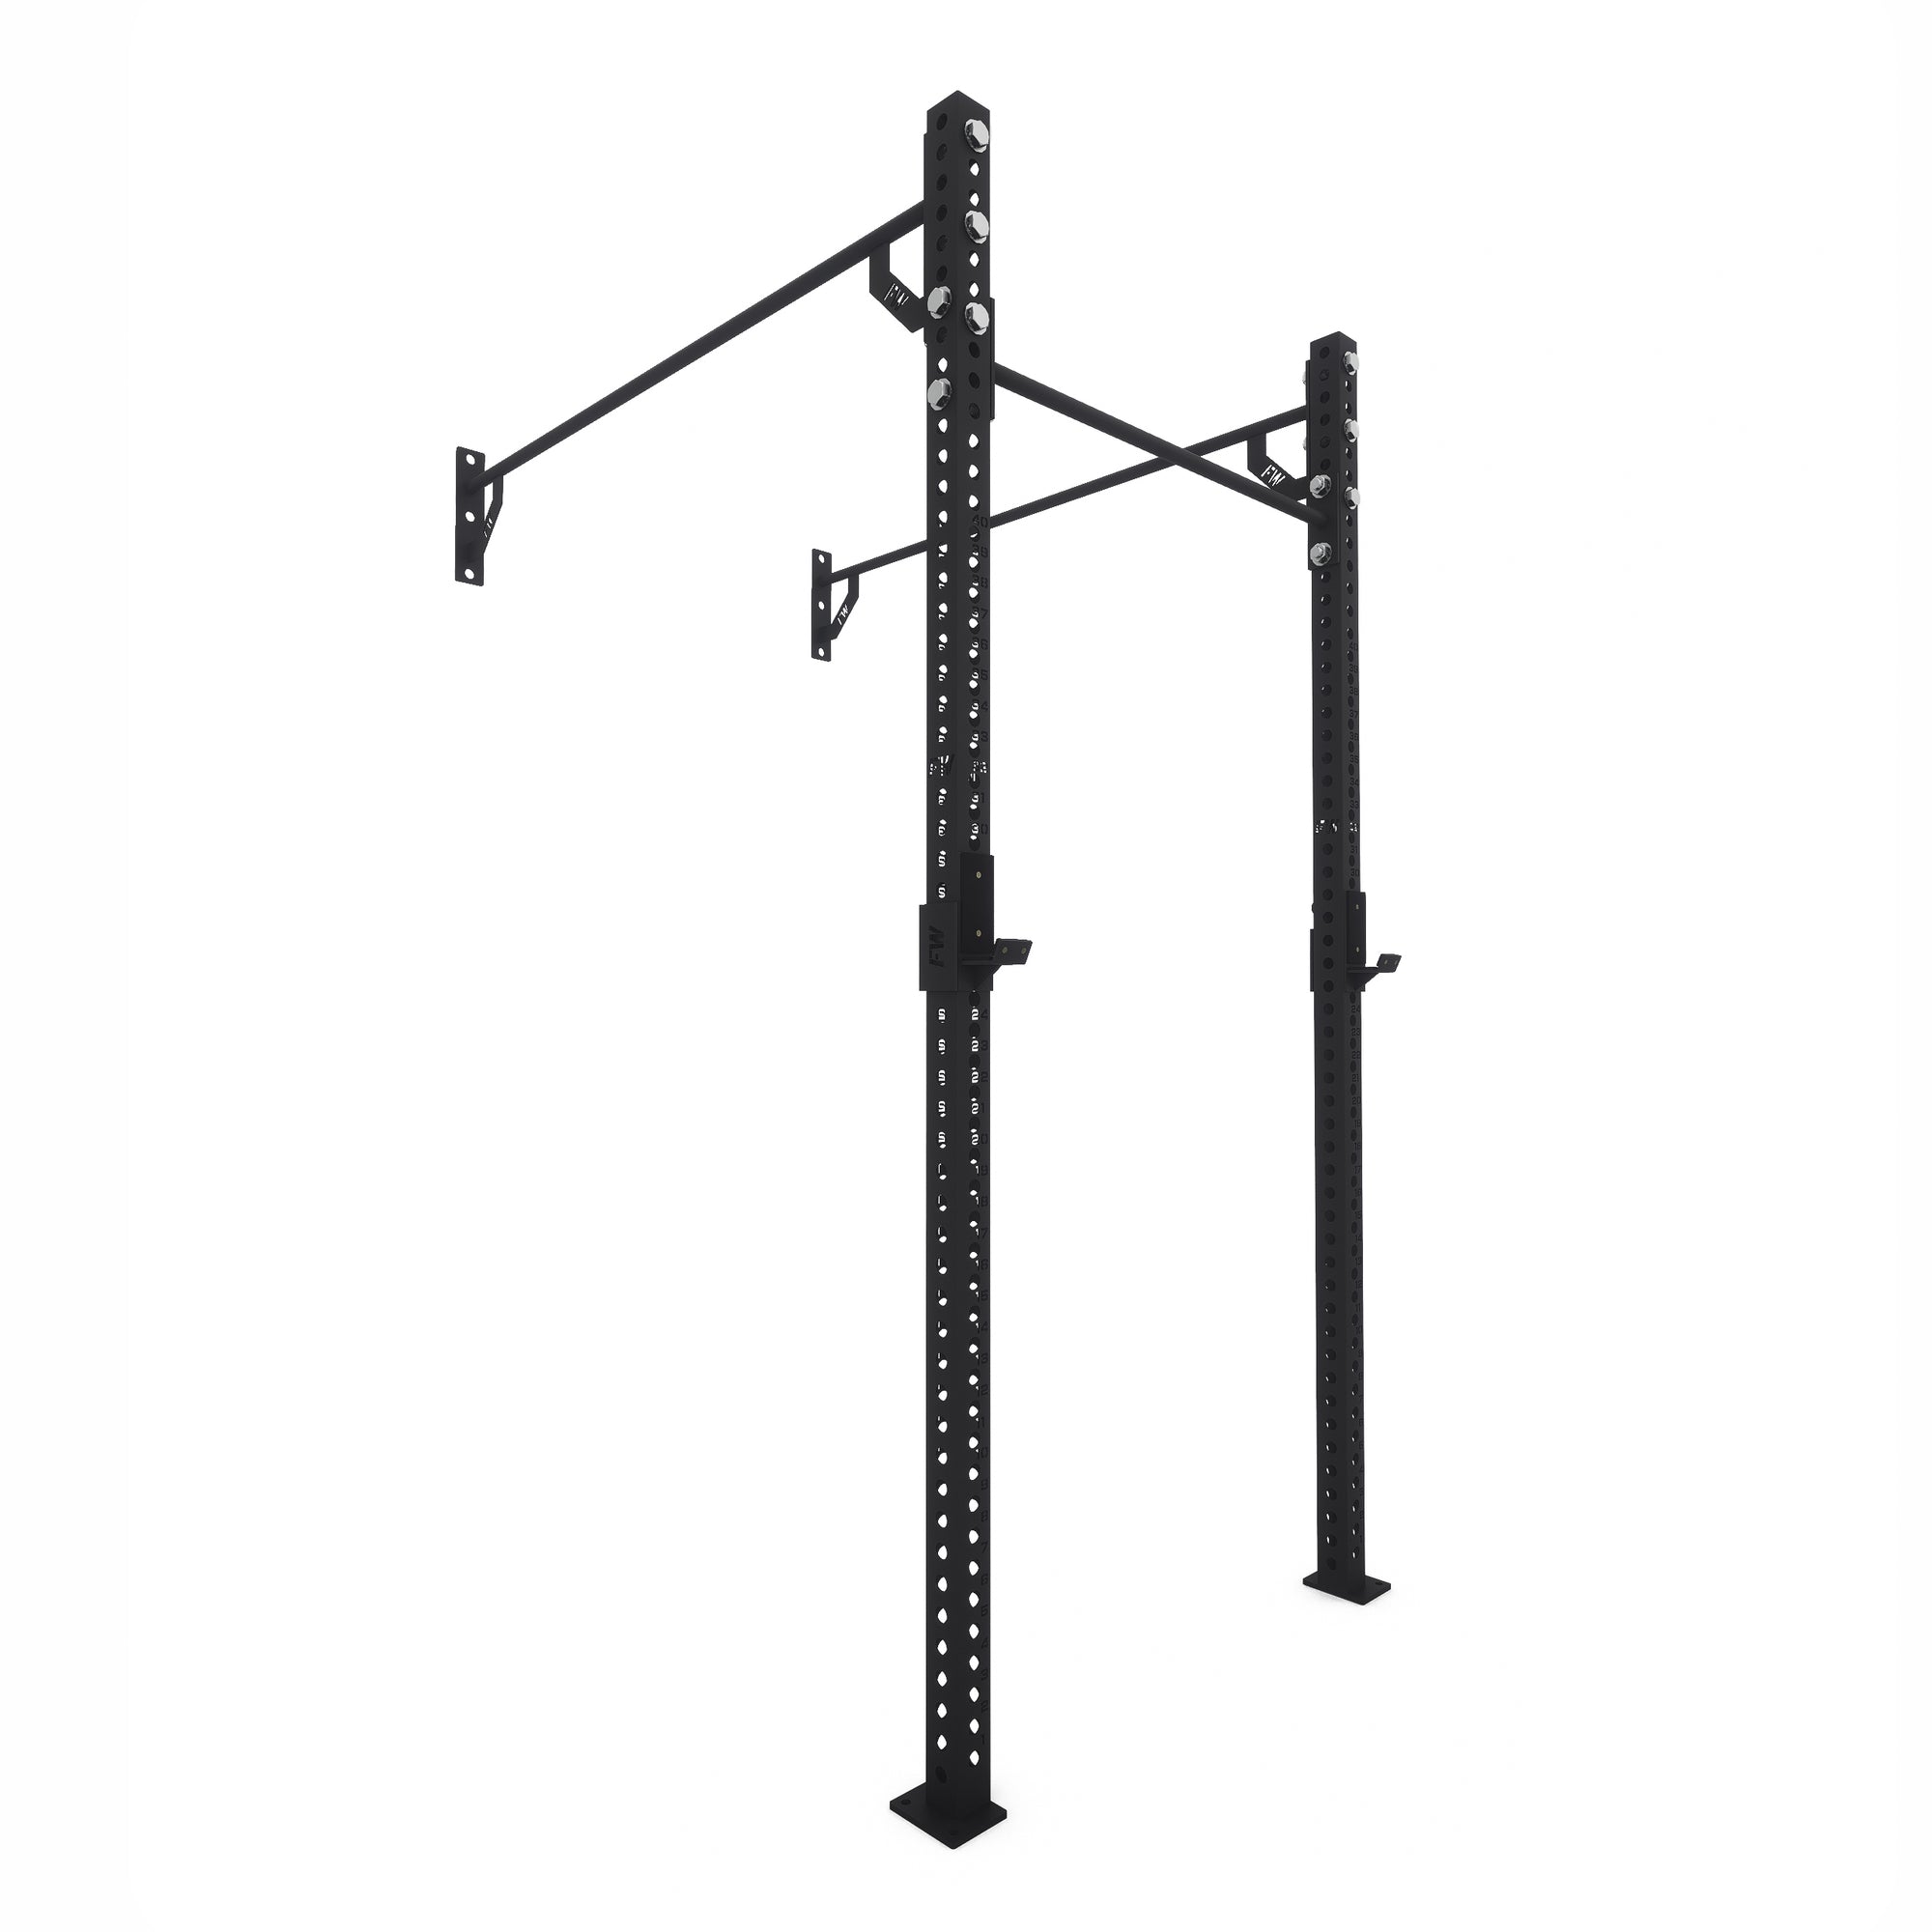 Pro Wall-Mounted Gym Rig